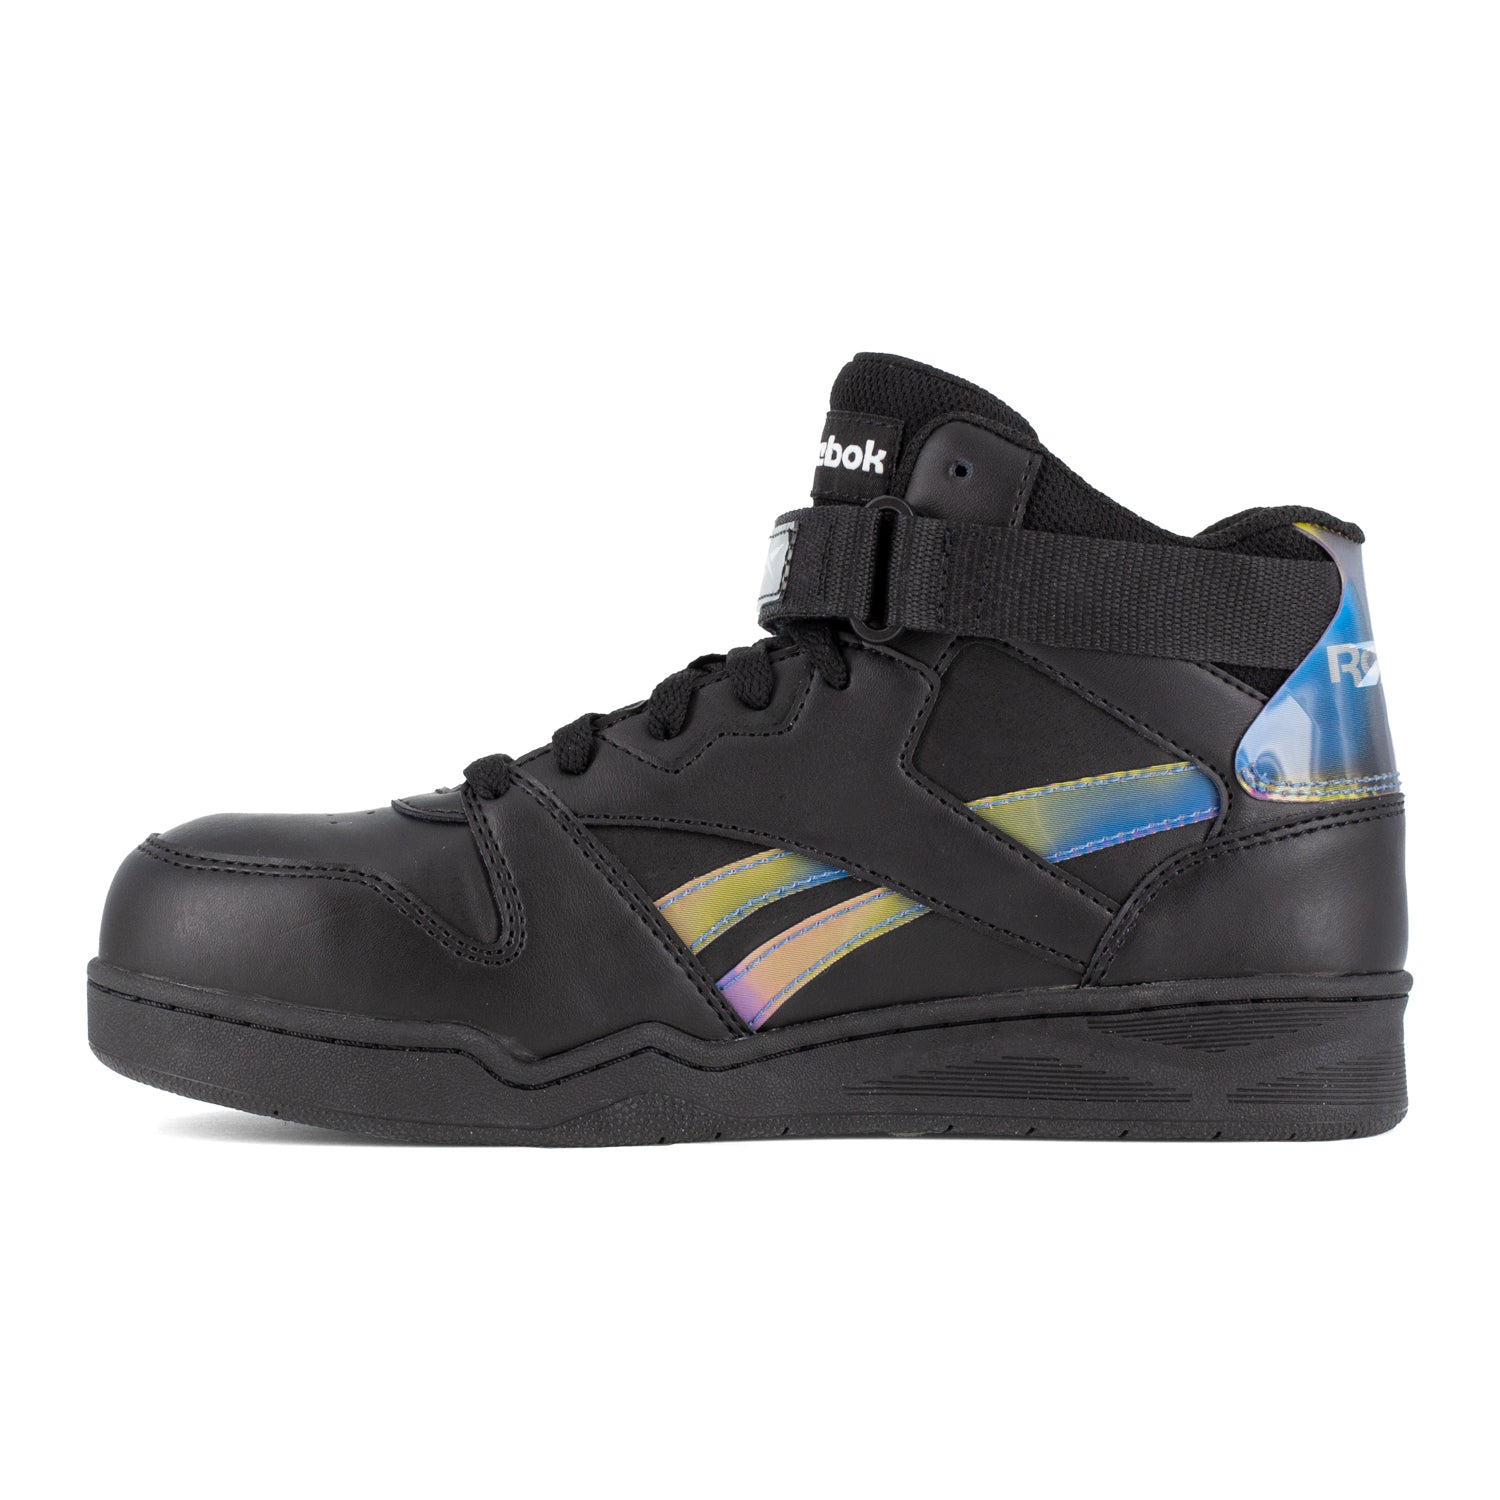 Reebok Womens Holographic Black CT High Top Sneaker Work Shoes – The Western